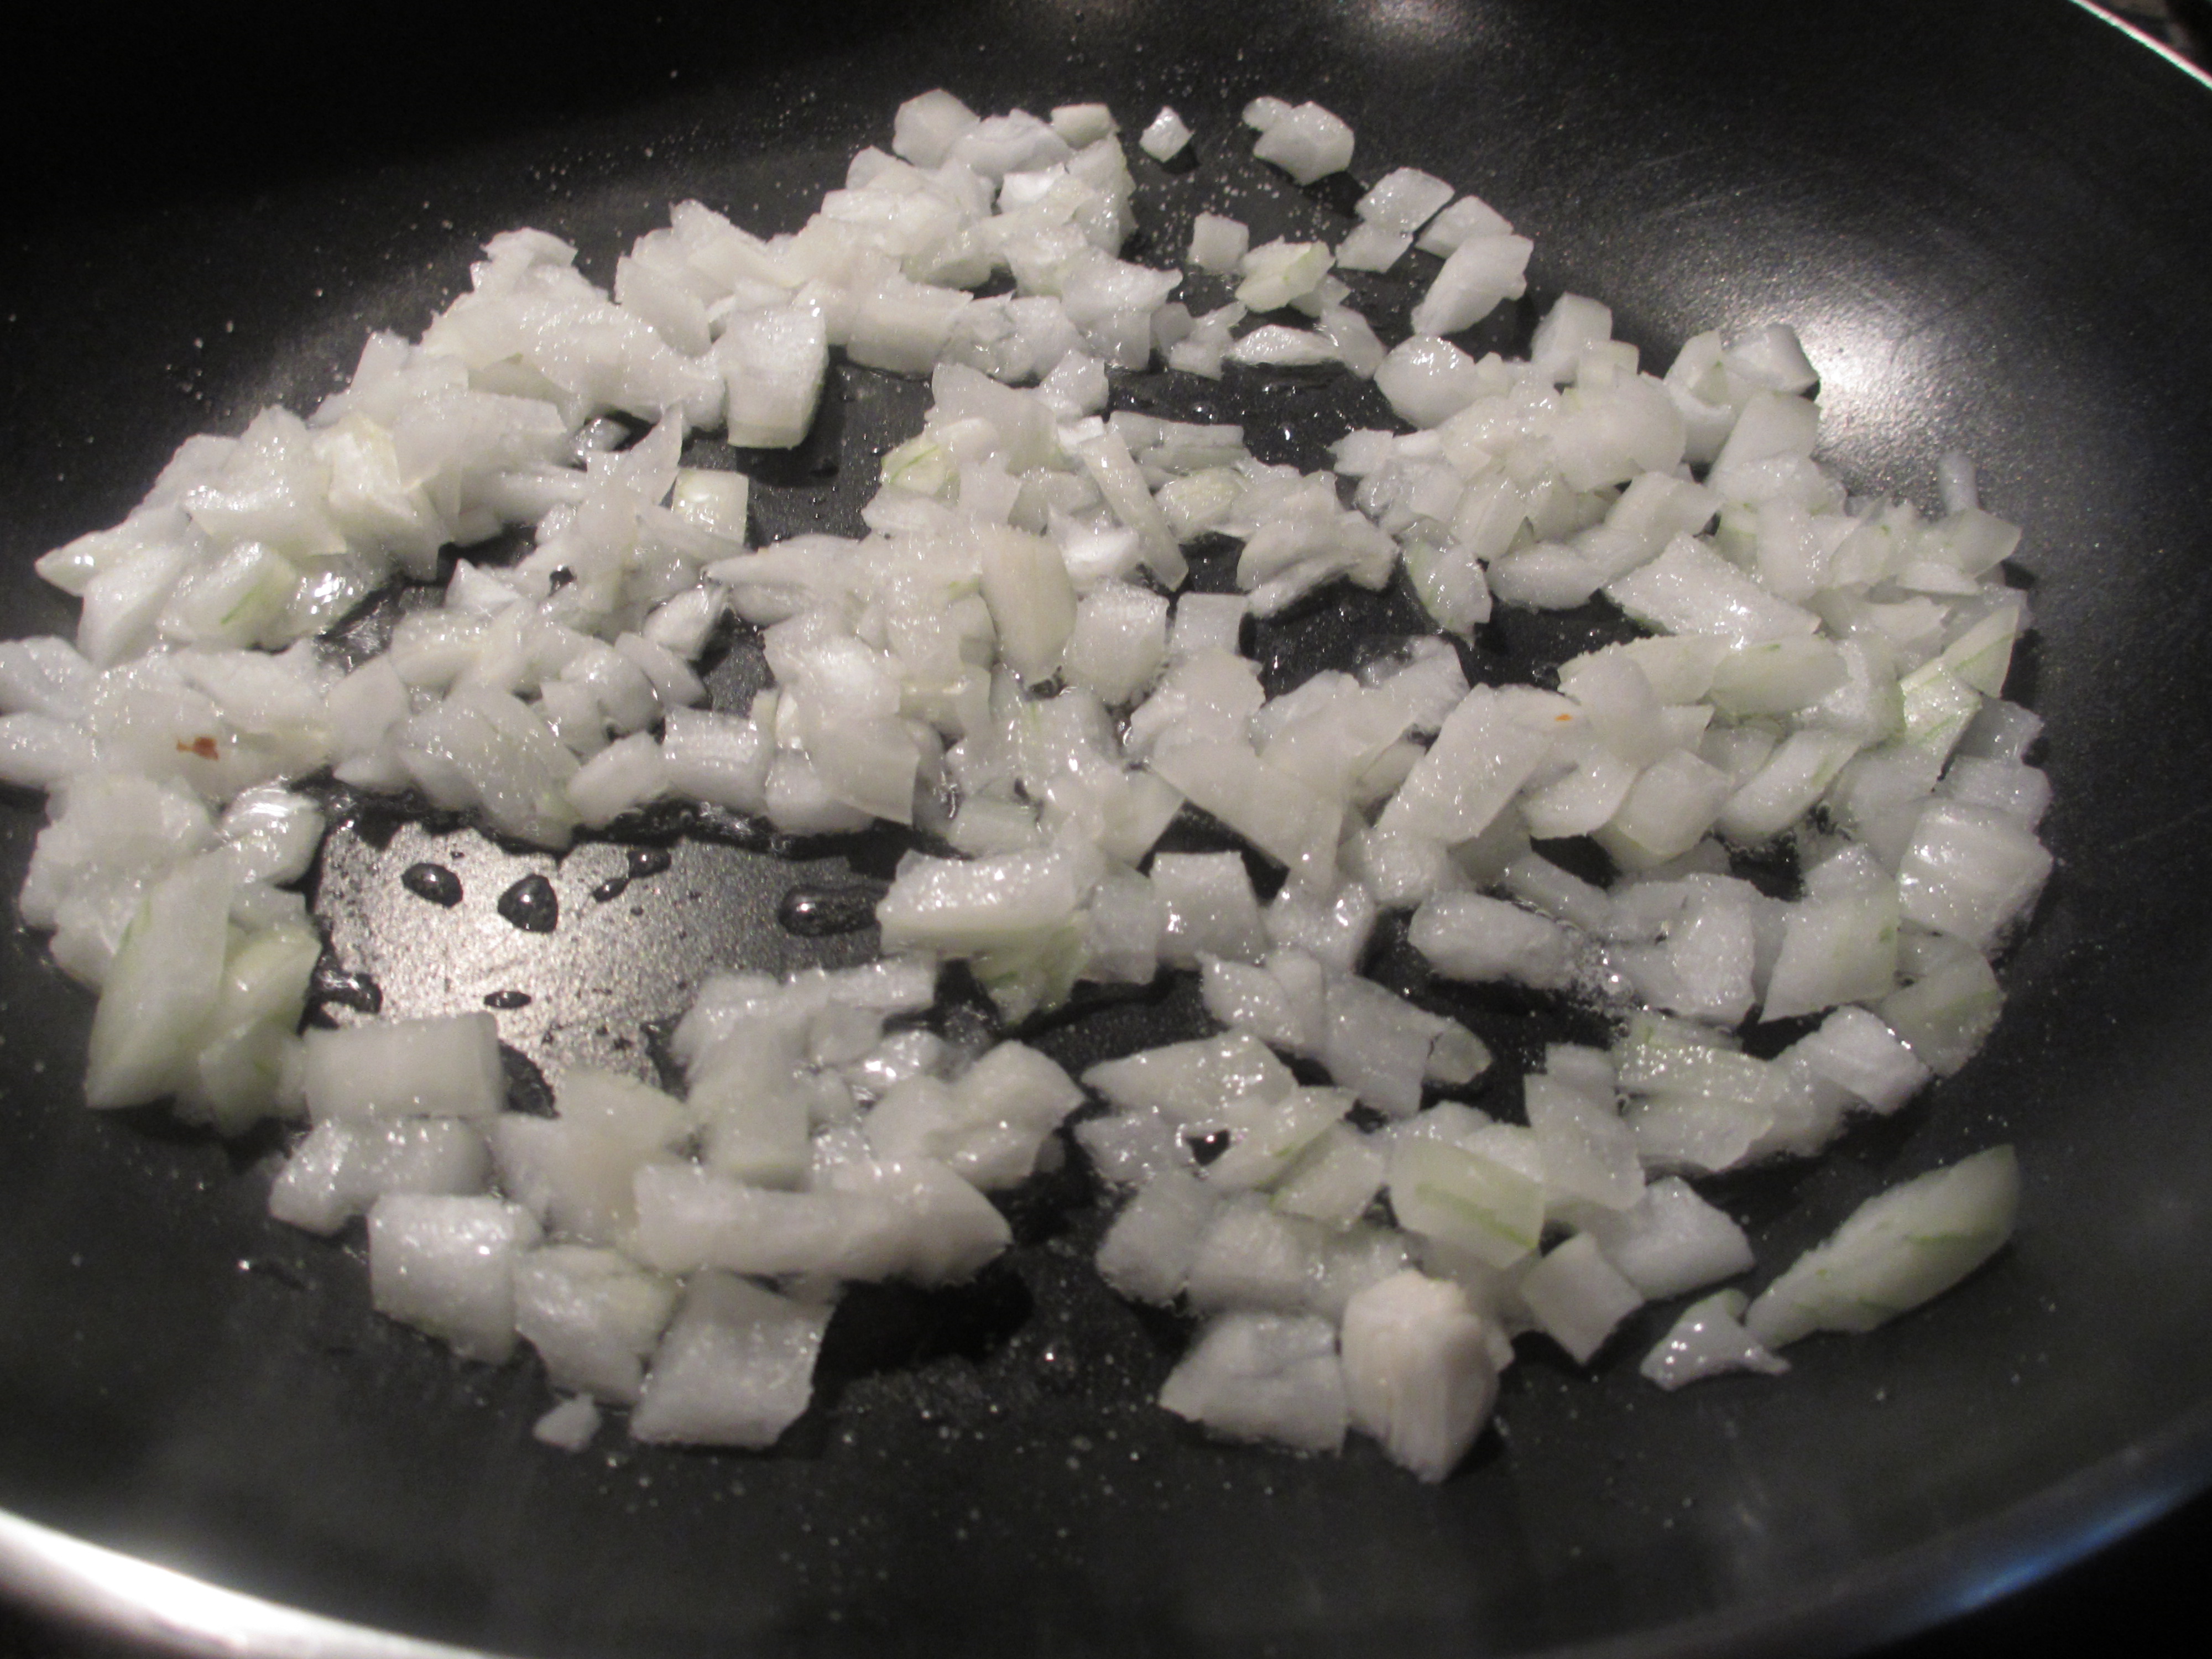 Chopped onions cooking on the stove